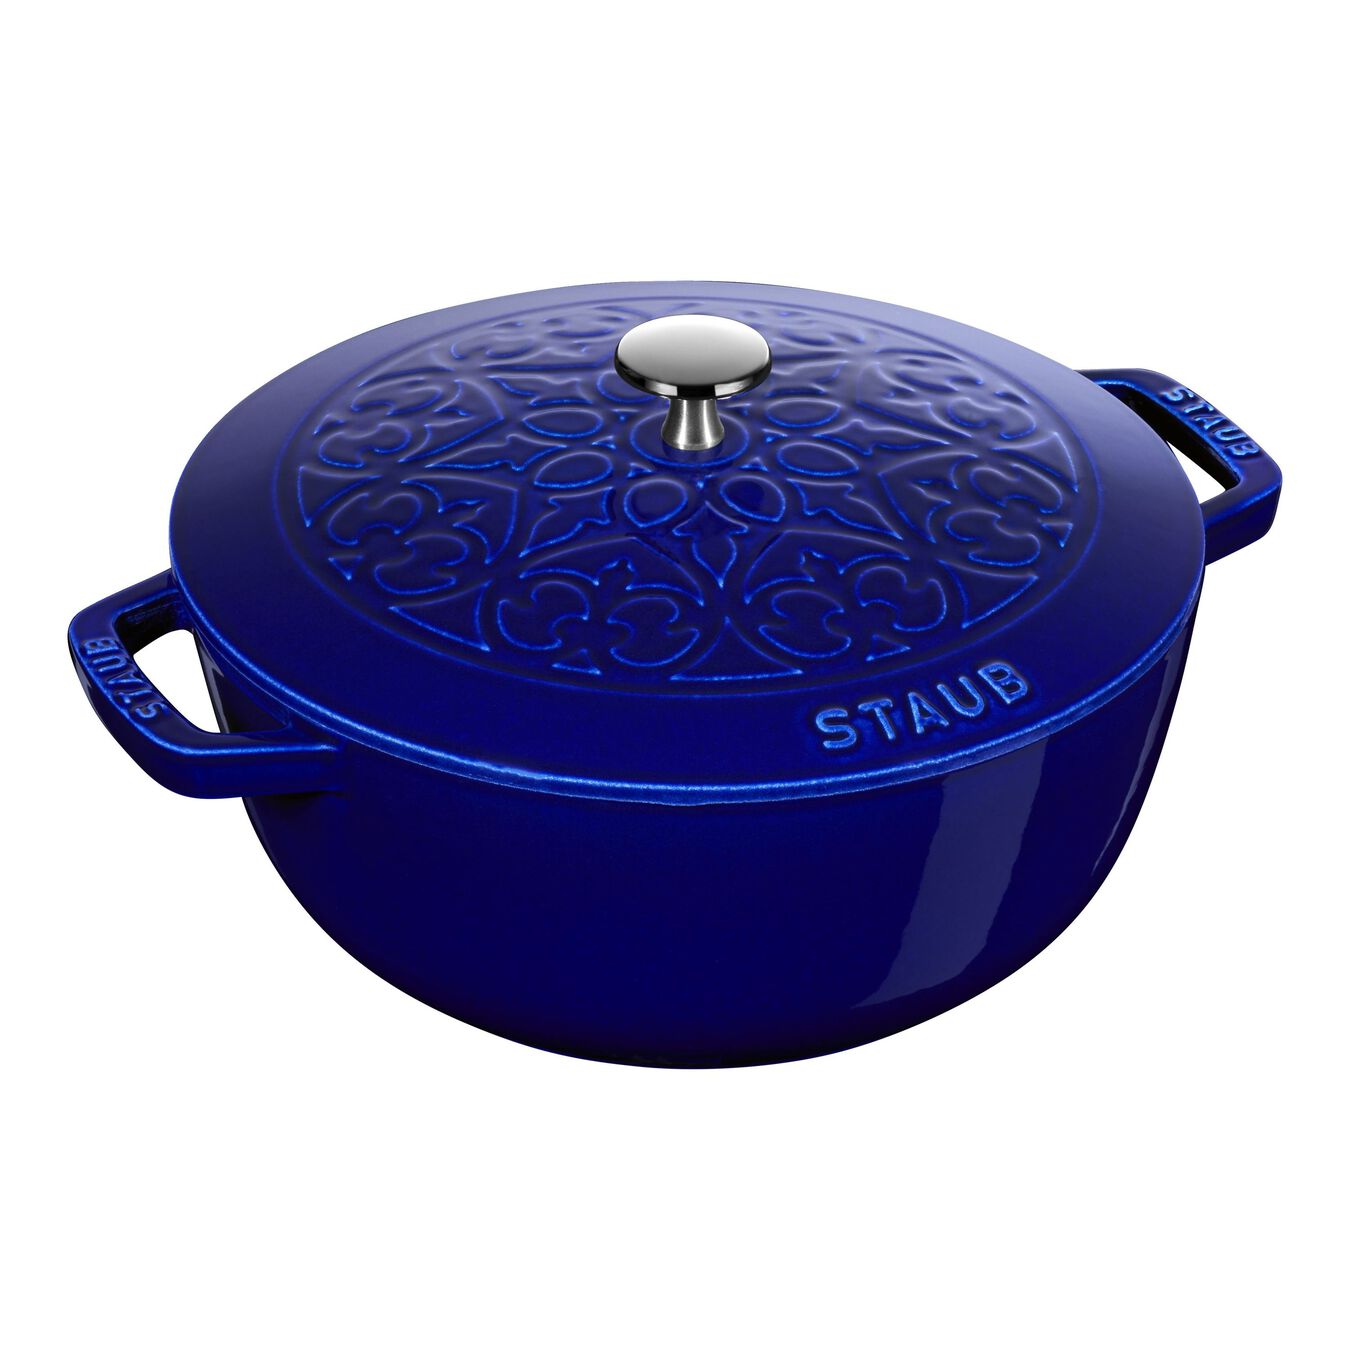 3.6 l cast iron round French Oven, lily decal, dark-blue - Visual Imperfections,,large 1